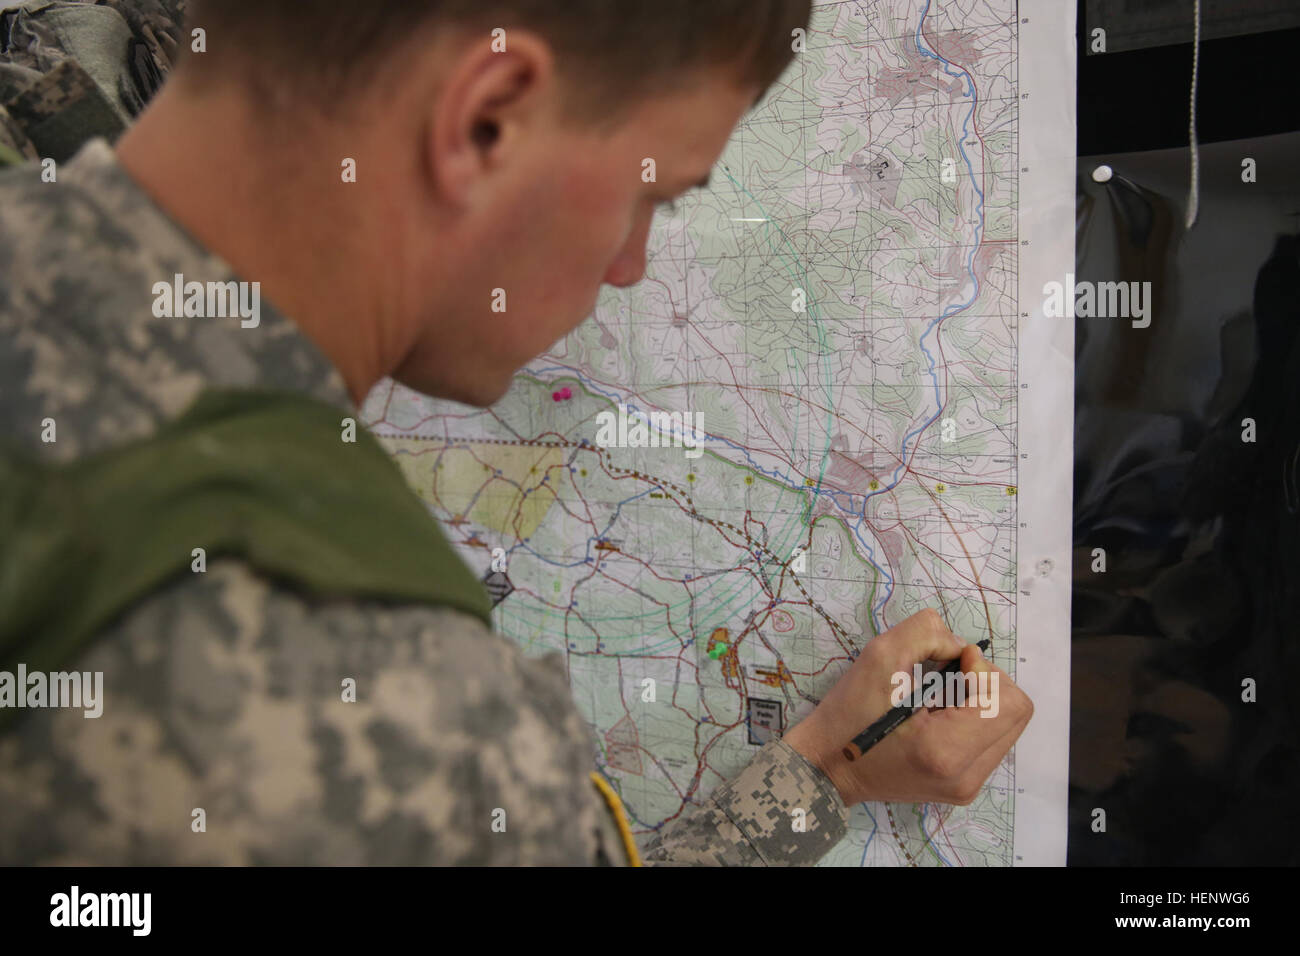 A U.S. Soldier assigned to Alpha Troop, 1st Squadron (Airborne), 40th Cavalry Regiment plots points on a map while conducting tactical operations center (TOC) operations during Rotation 14-09 at the Joint Multinational Readiness Center (JMRC) in Hohenfels, Germany, Oct. 07, 2014. The rotation is based on the current operational environment and is designed to prepare the unit for peace support, stability, and contingency operations. (U.S. Army photo by Spc. Brian Chaney/Released) Rotation 14-09 141007-A-EM978-001 Stock Photo